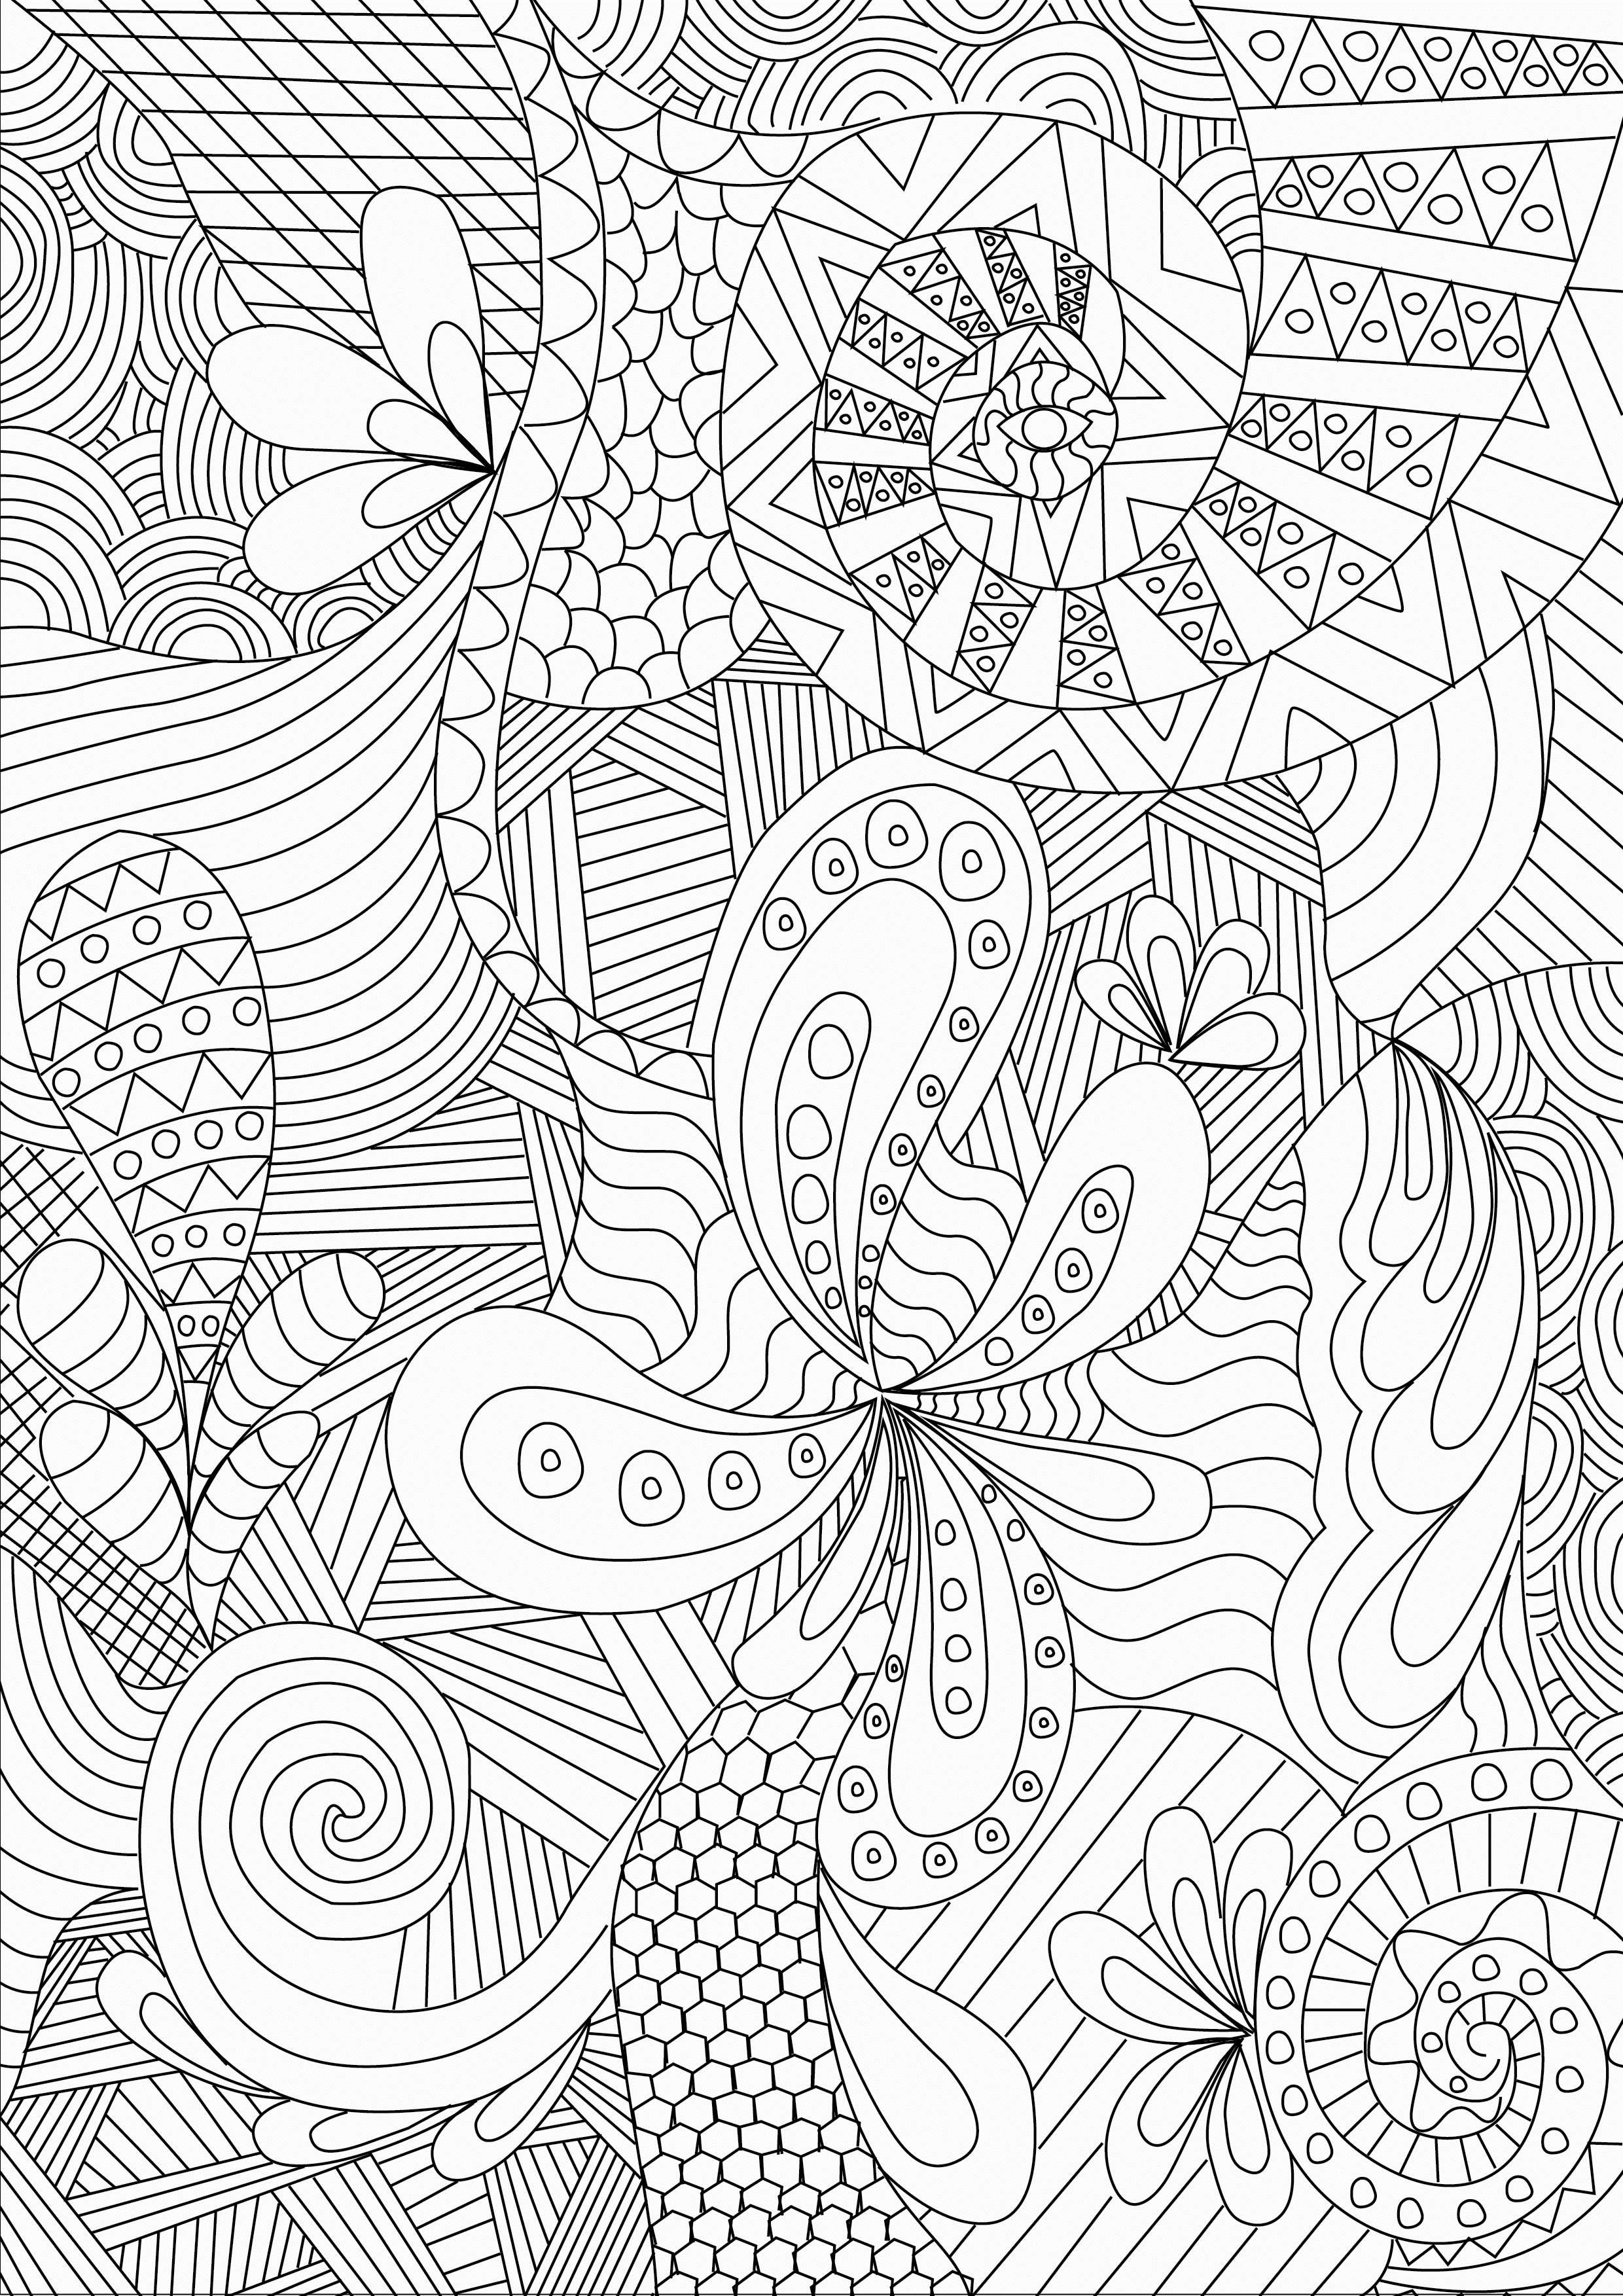 Download Zentangle Colouring Pages - In The Playroom